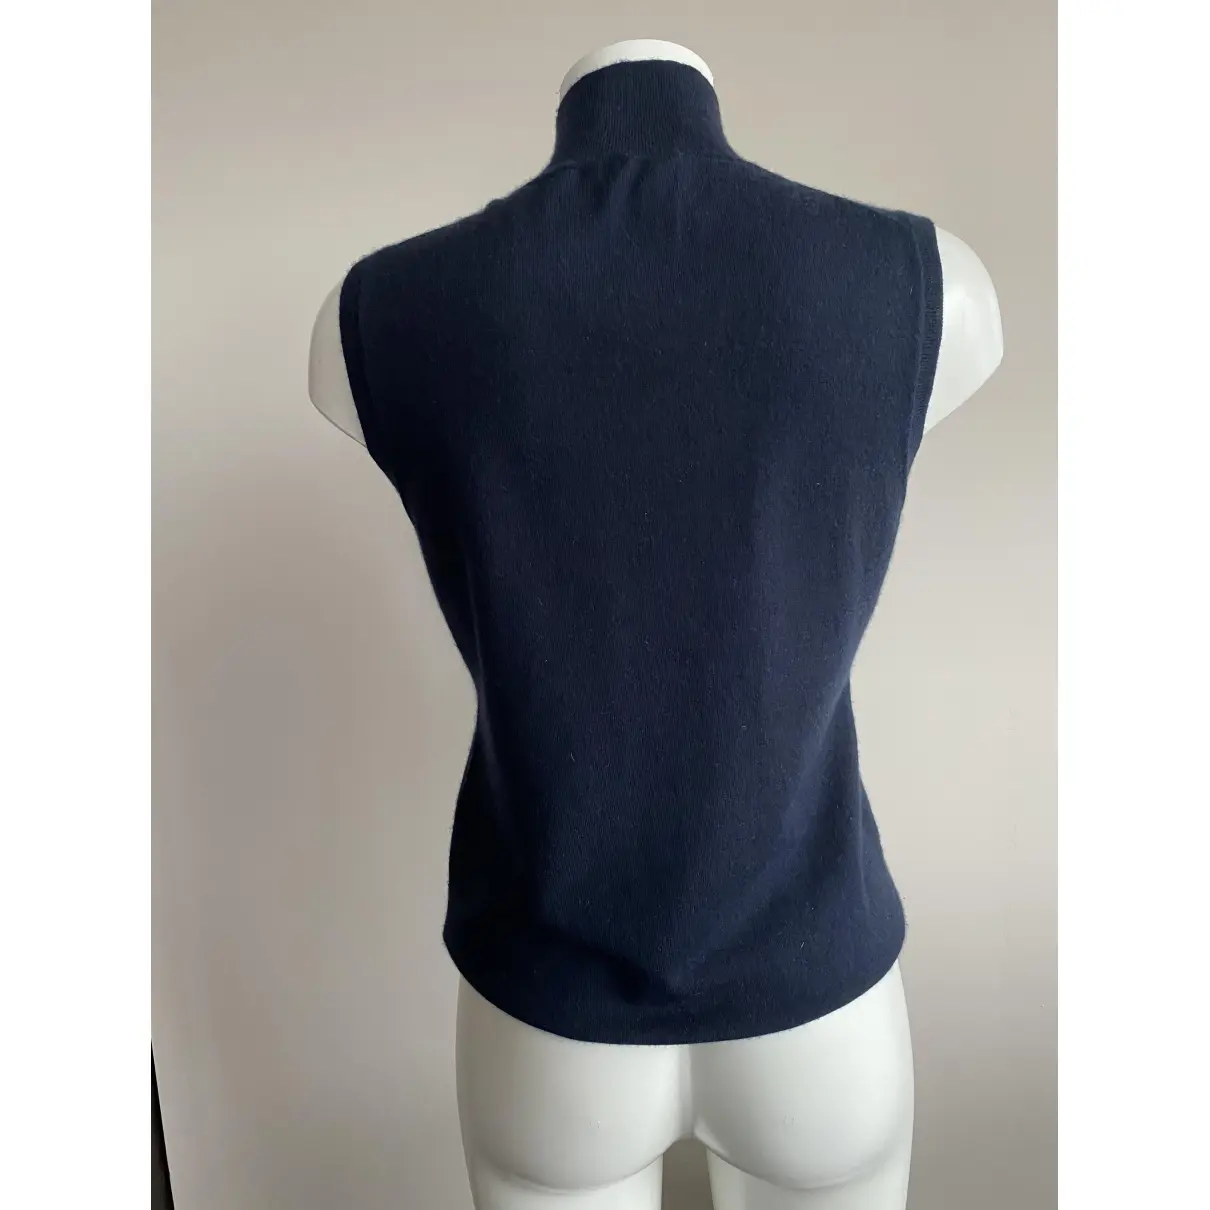 Cashmere jersey top Theory